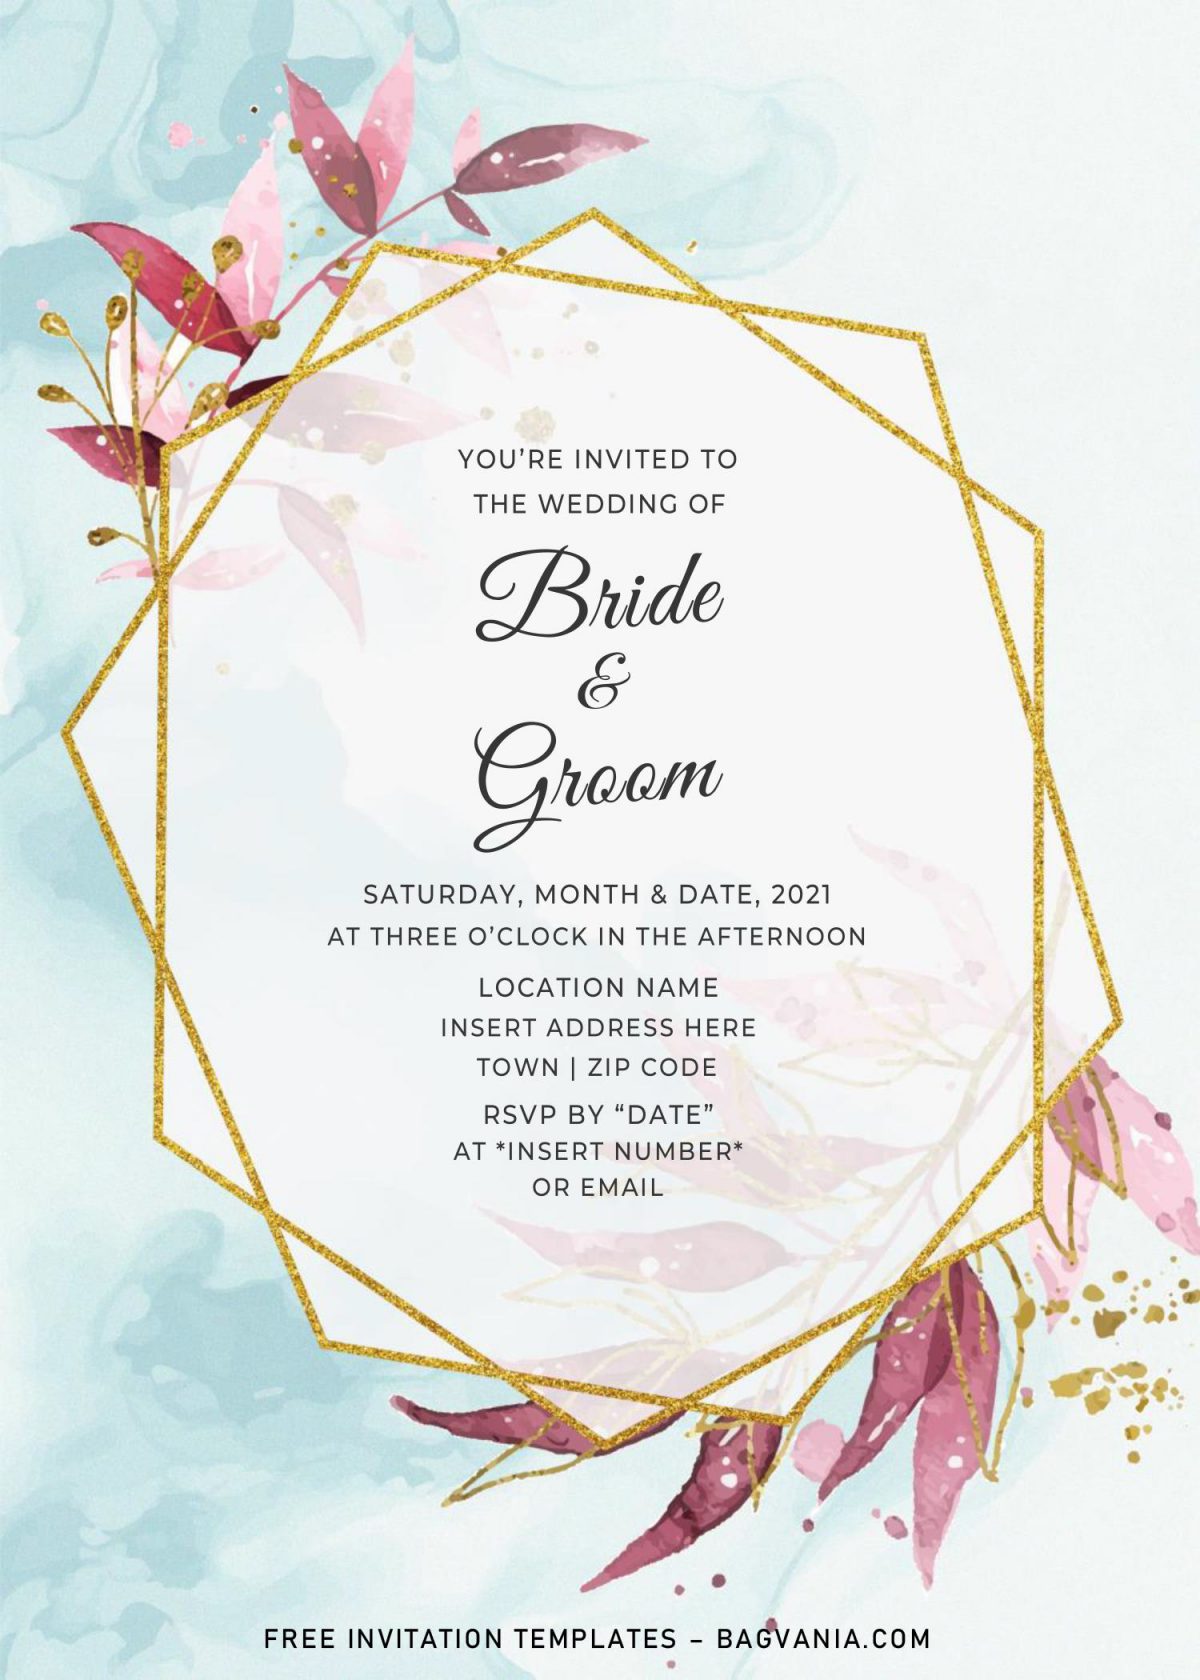 Free Gold Boho Wedding Invitation Templates For Word and has beautiful watercolor background